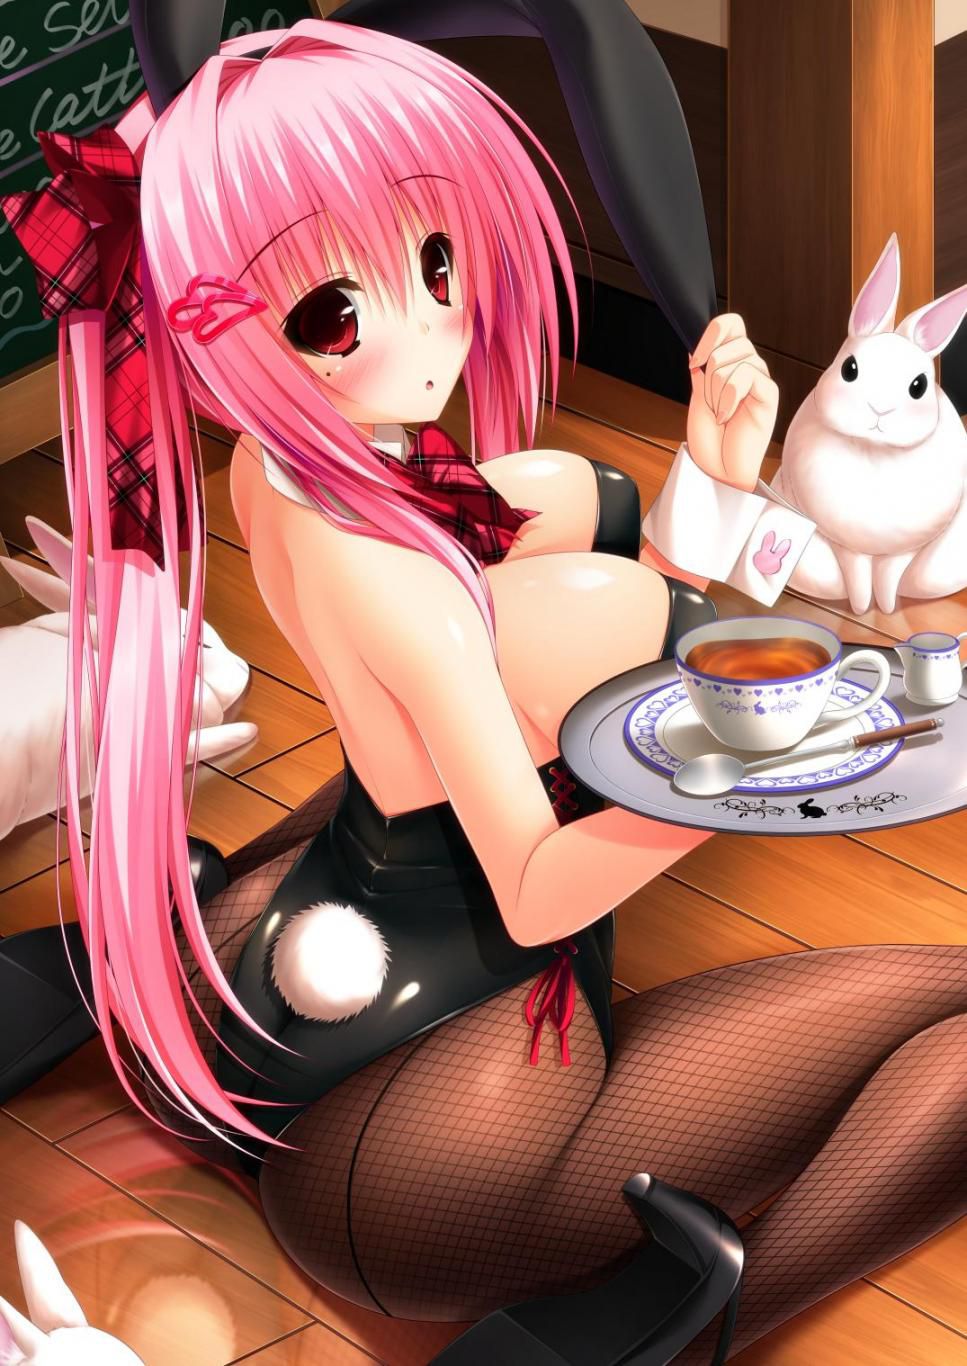 【Secondary erotic】 The secondary dosquebe image of a girl dressed in a bunny girl costume that stands out for the dosukebe of the buttocks and pie is here 24